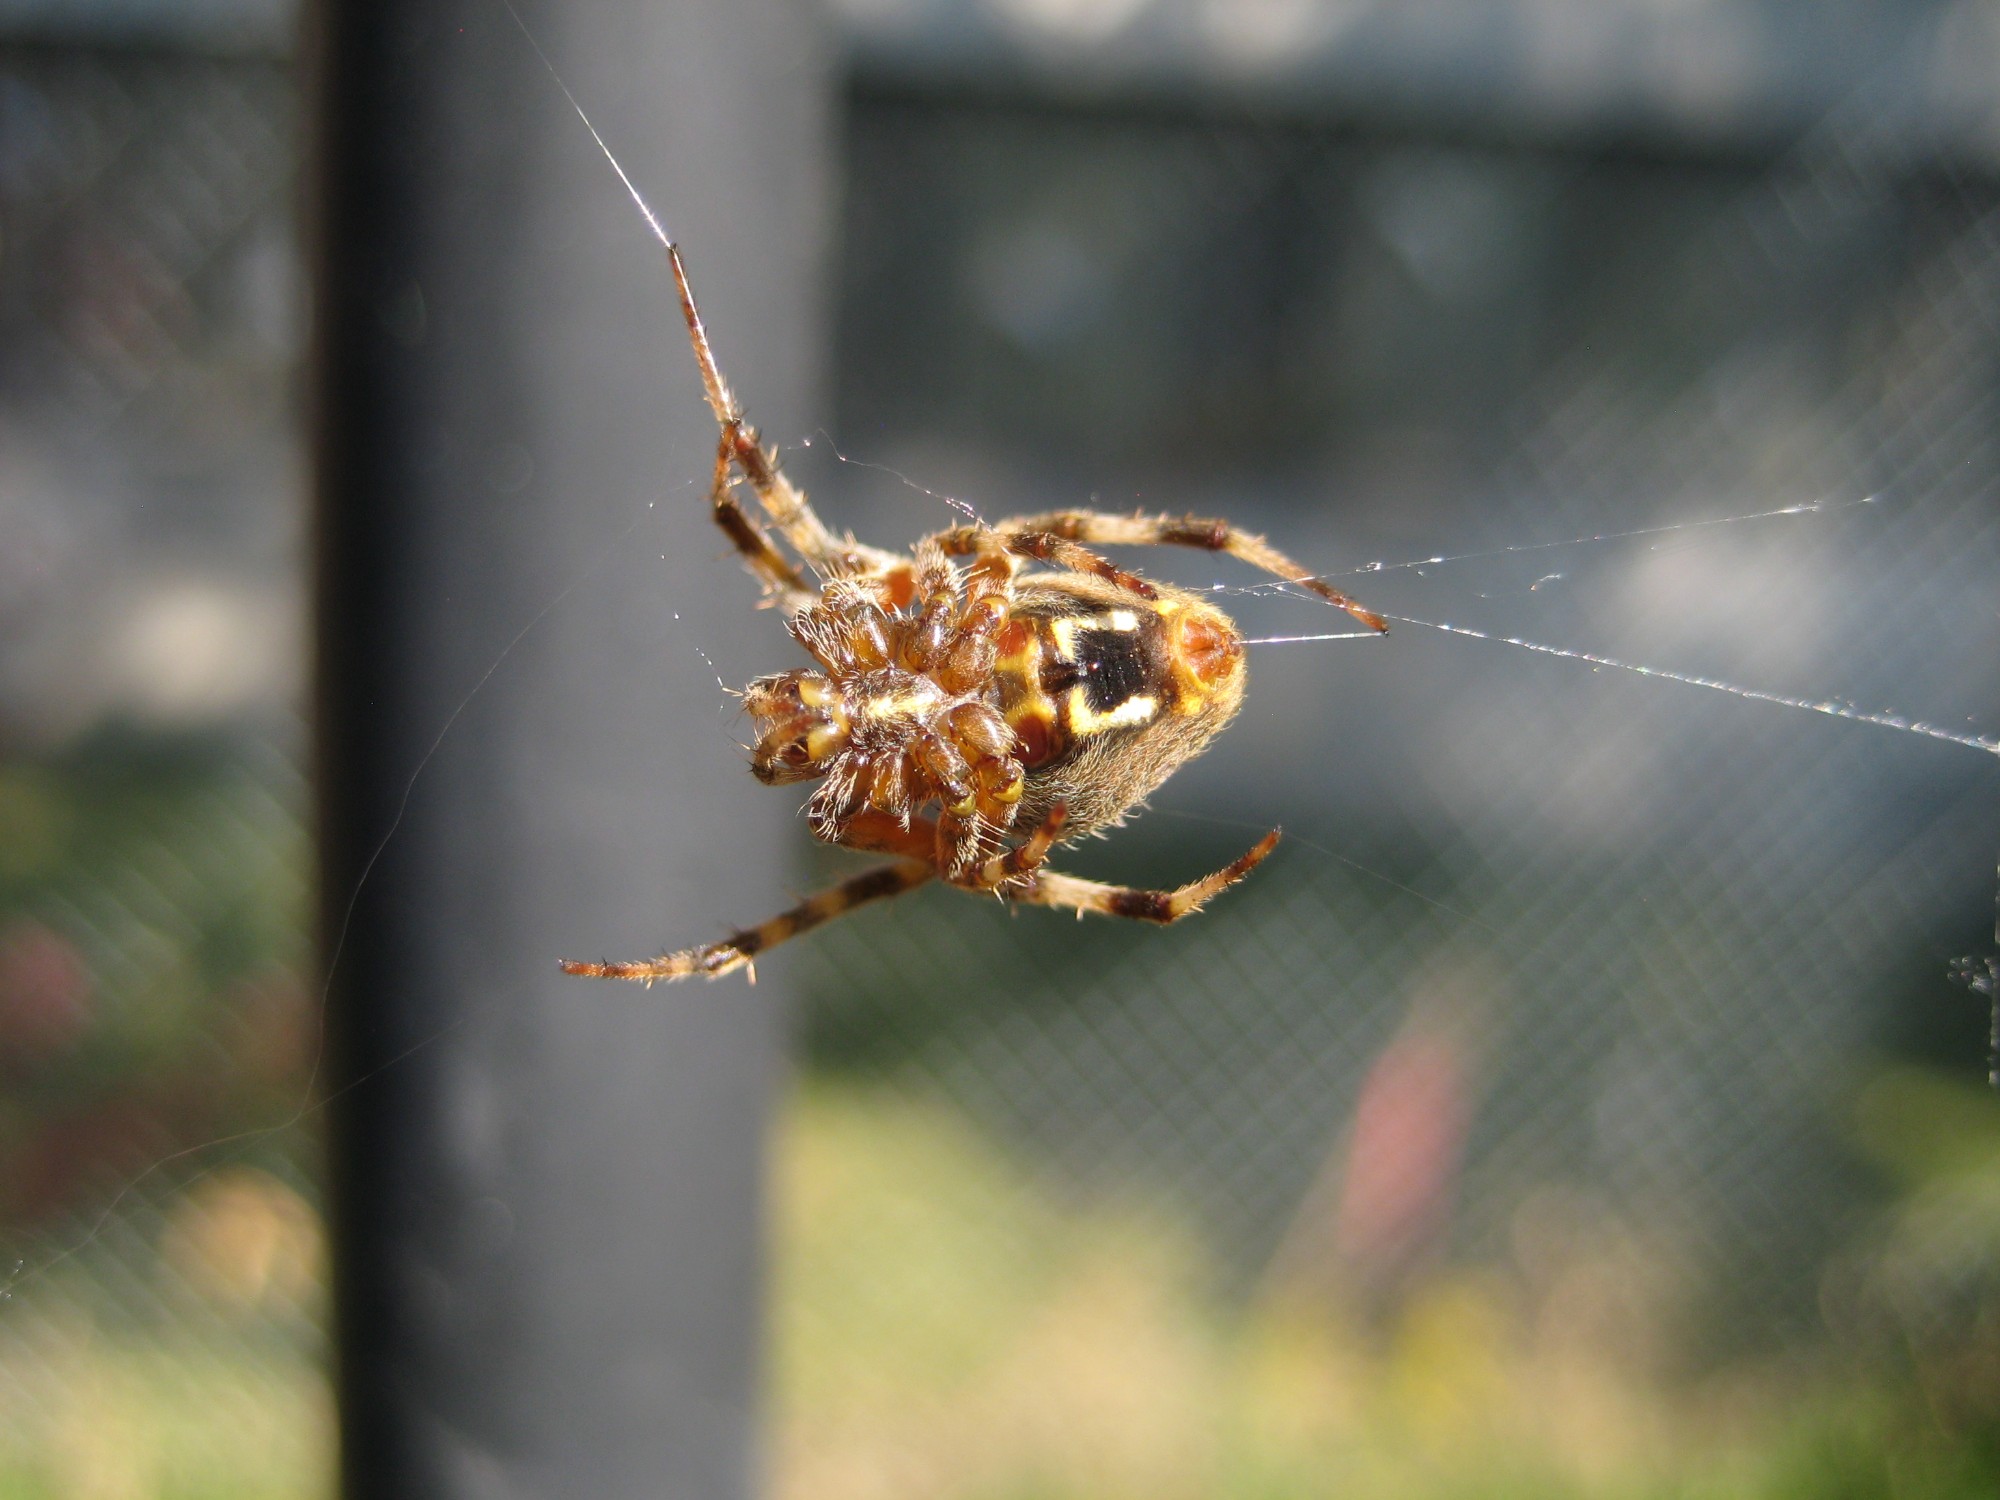 An orbweaver in her web in front of a railing, seen from the ventral (belly) side